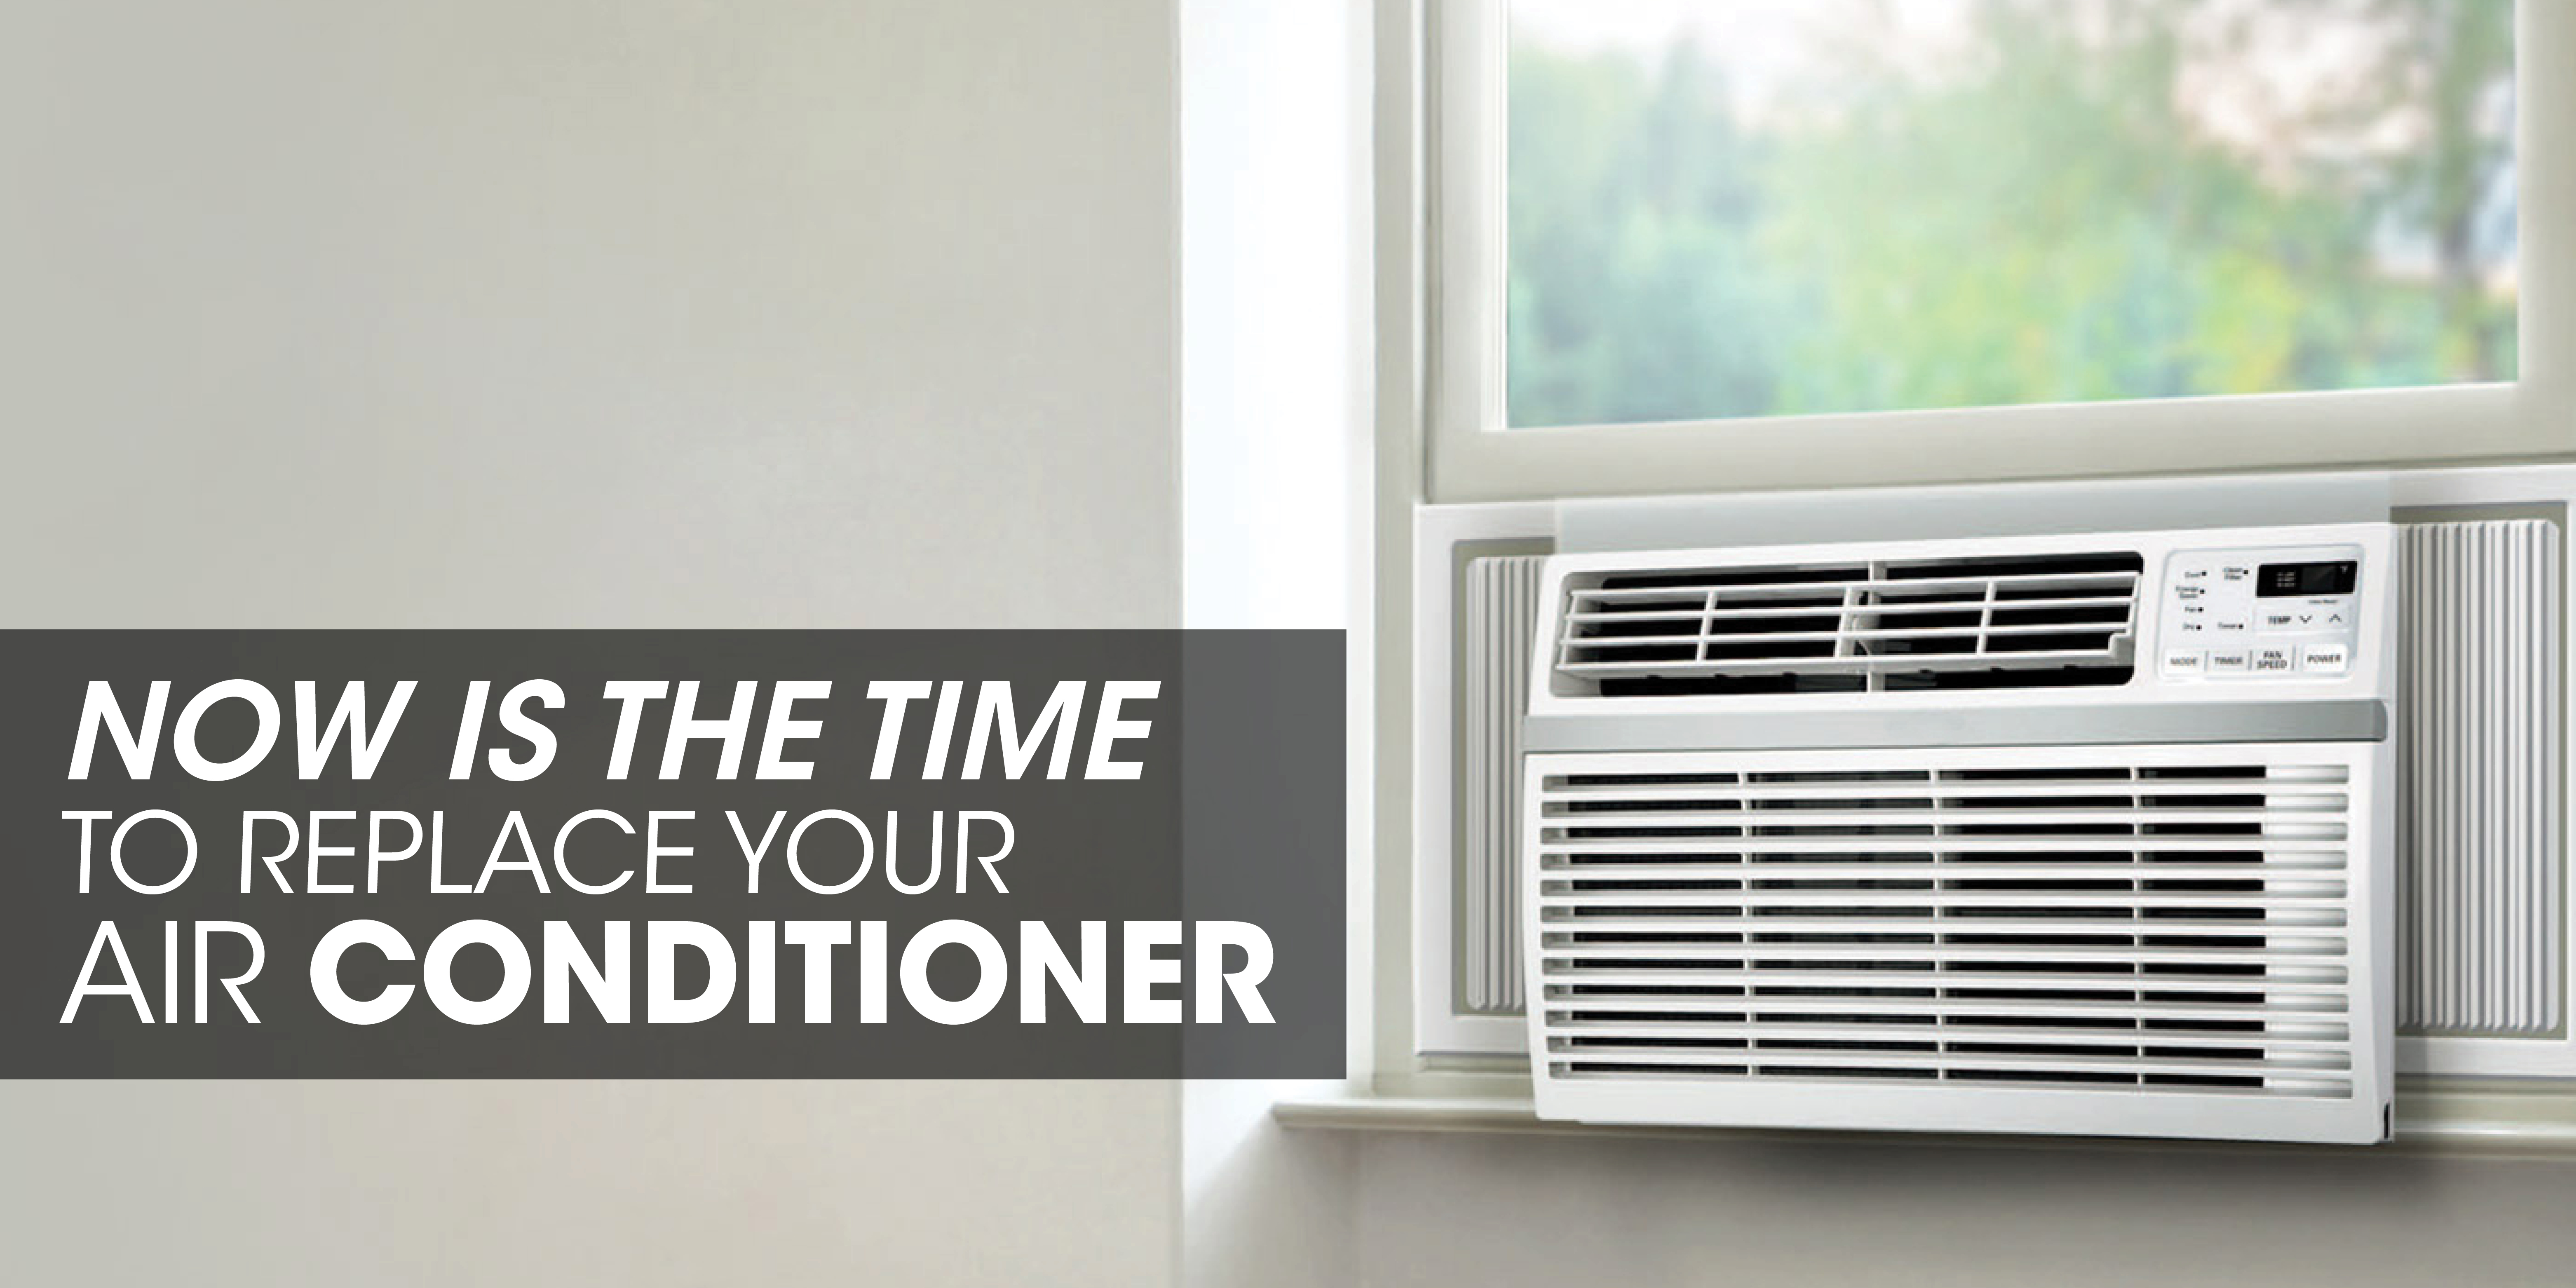 Window AC unit with text: "Now is the time to replace your air conditioner"